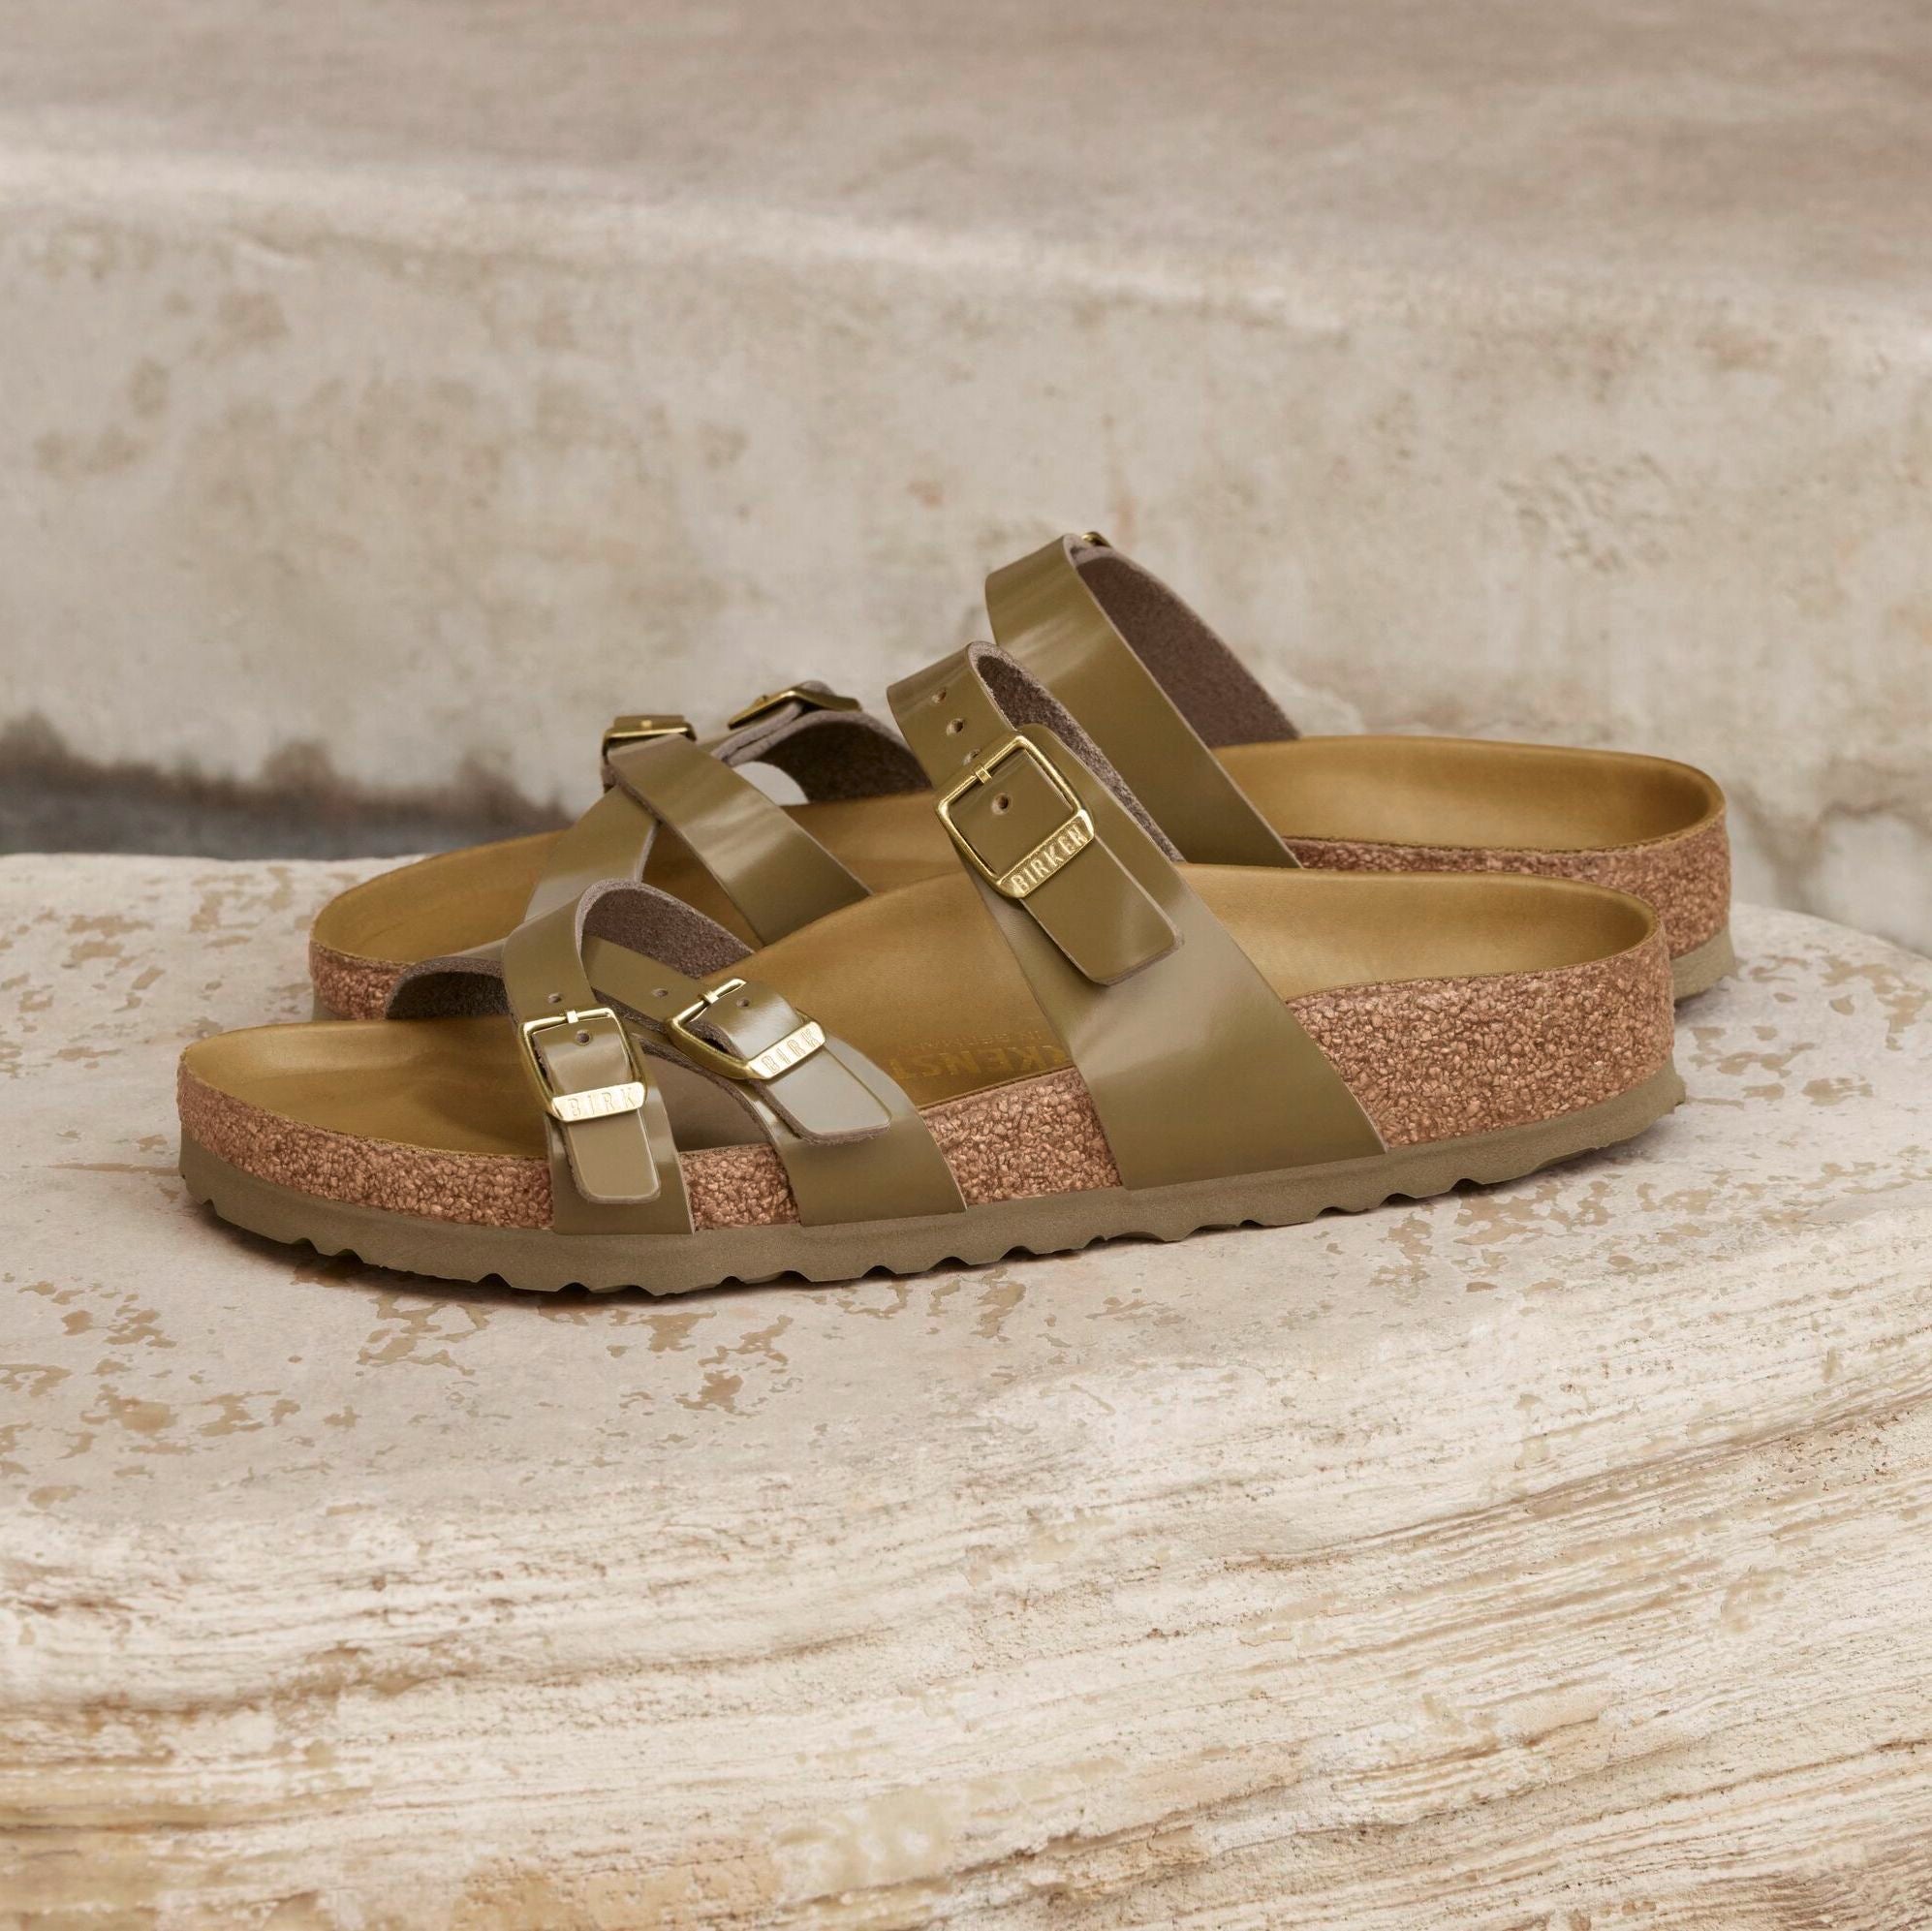 Birkenstock Limited Edition Franca Hex mud green high shine leather